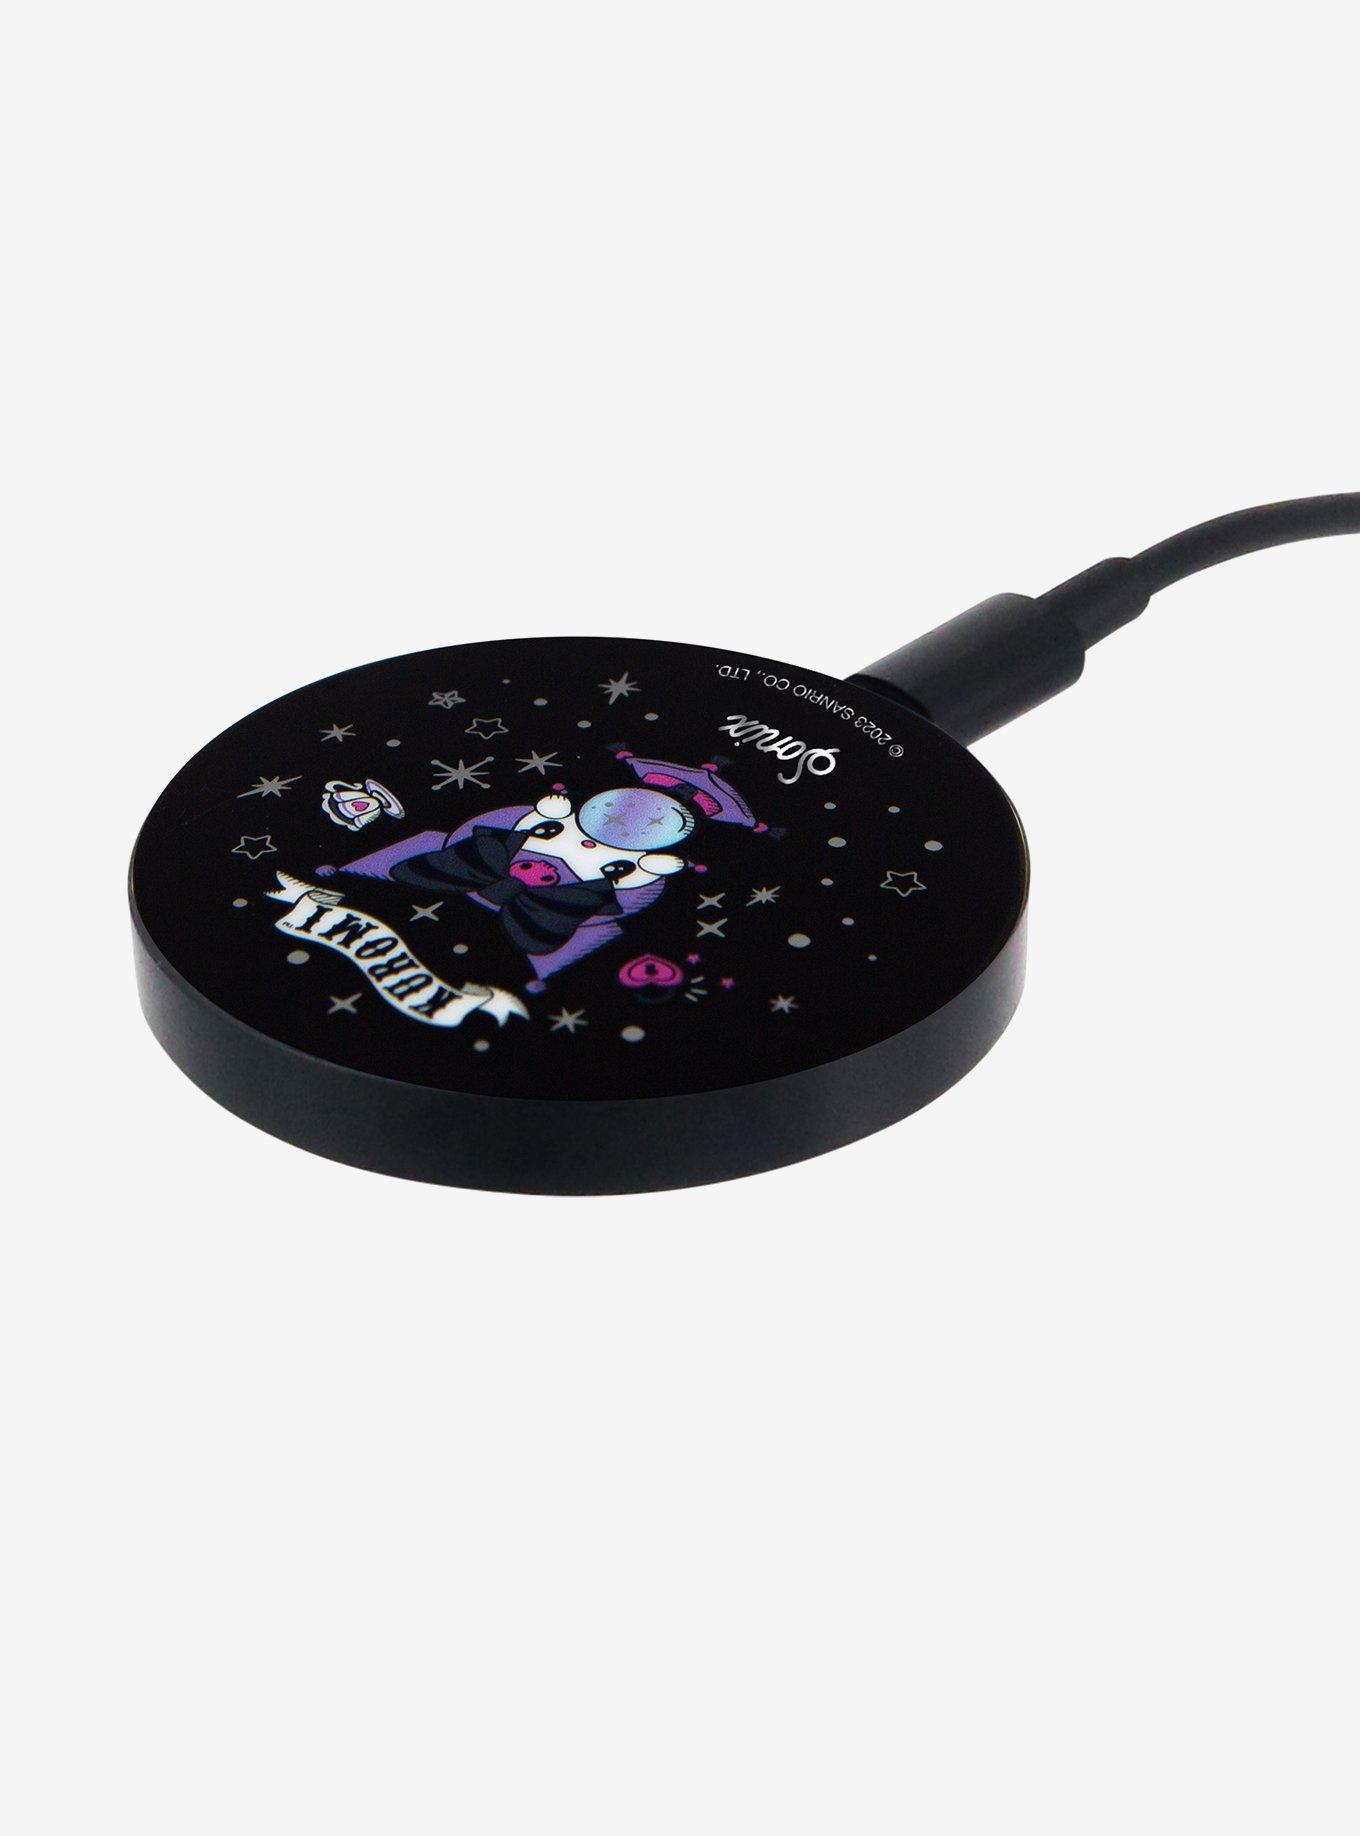 Sonix Kuromi Magnetic Link Wireless Charger